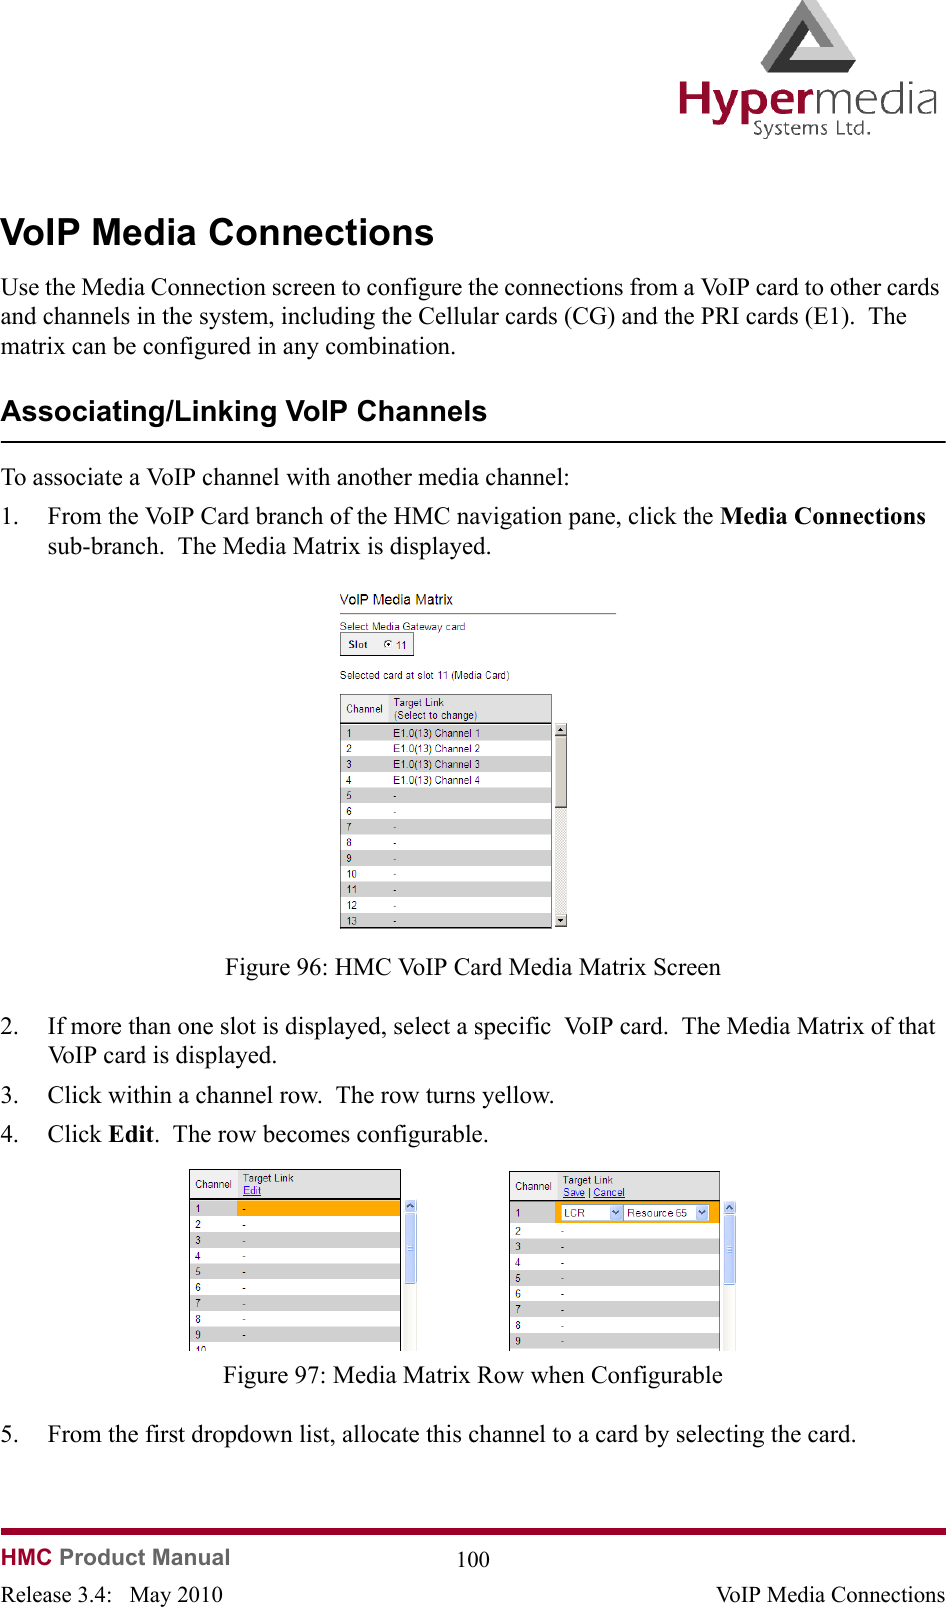   HMC Product Manual  100Release 3.4:   May 2010 VoIP Media ConnectionsVoIP Media ConnectionsUse the Media Connection screen to configure the connections from a VoIP card to other cards and channels in the system, including the Cellular cards (CG) and the PRI cards (E1).  The matrix can be configured in any combination. Associating/Linking VoIP ChannelsTo associate a VoIP channel with another media channel:1. From the VoIP Card branch of the HMC navigation pane, click the Media Connections sub-branch.  The Media Matrix is displayed.              Figure 96: HMC VoIP Card Media Matrix Screen2. If more than one slot is displayed, select a specific  VoIP card.  The Media Matrix of that VoIP card is displayed.3. Click within a channel row.  The row turns yellow.4. Click Edit.  The row becomes configurable.              Figure 97: Media Matrix Row when Configurable5. From the first dropdown list, allocate this channel to a card by selecting the card.